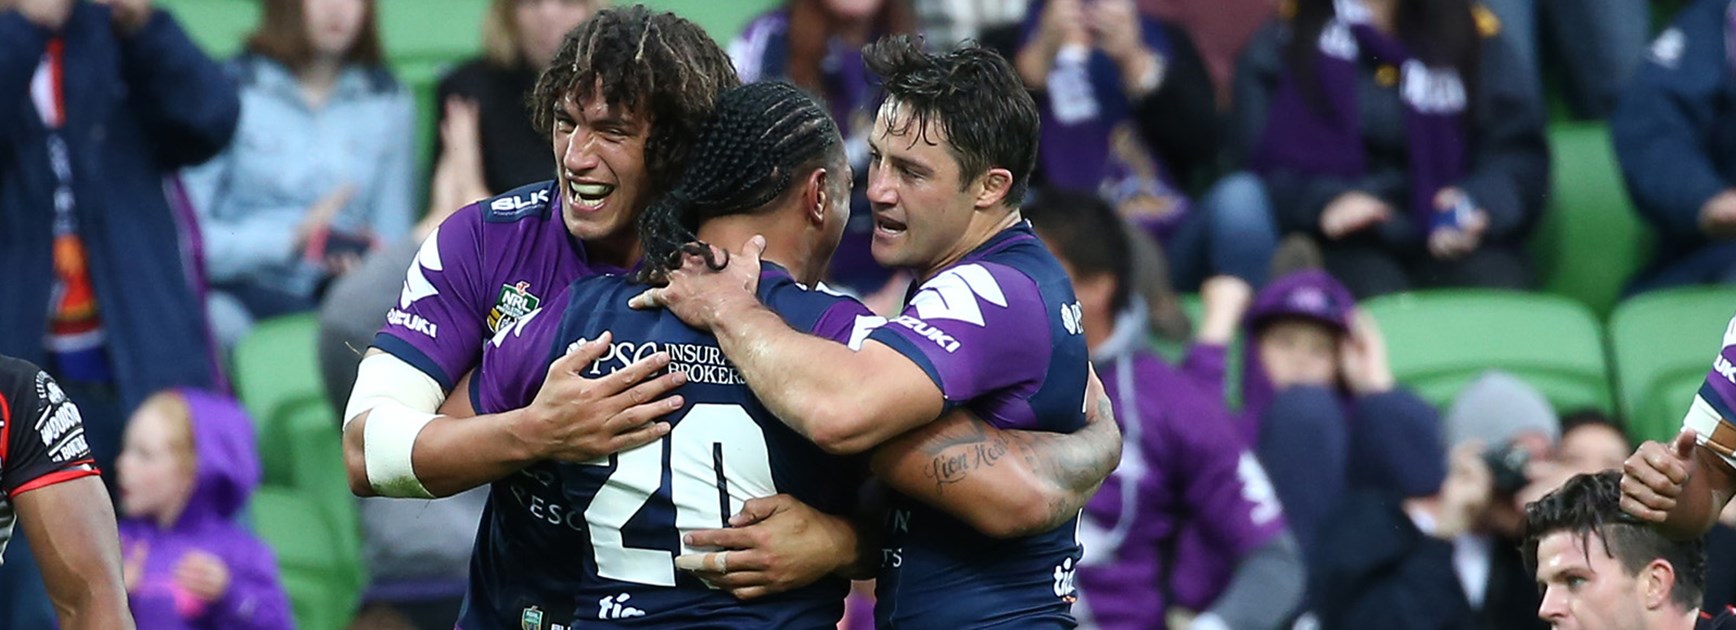 The Storm celebrate another try against the Warriors at Aami Park in Round 5.